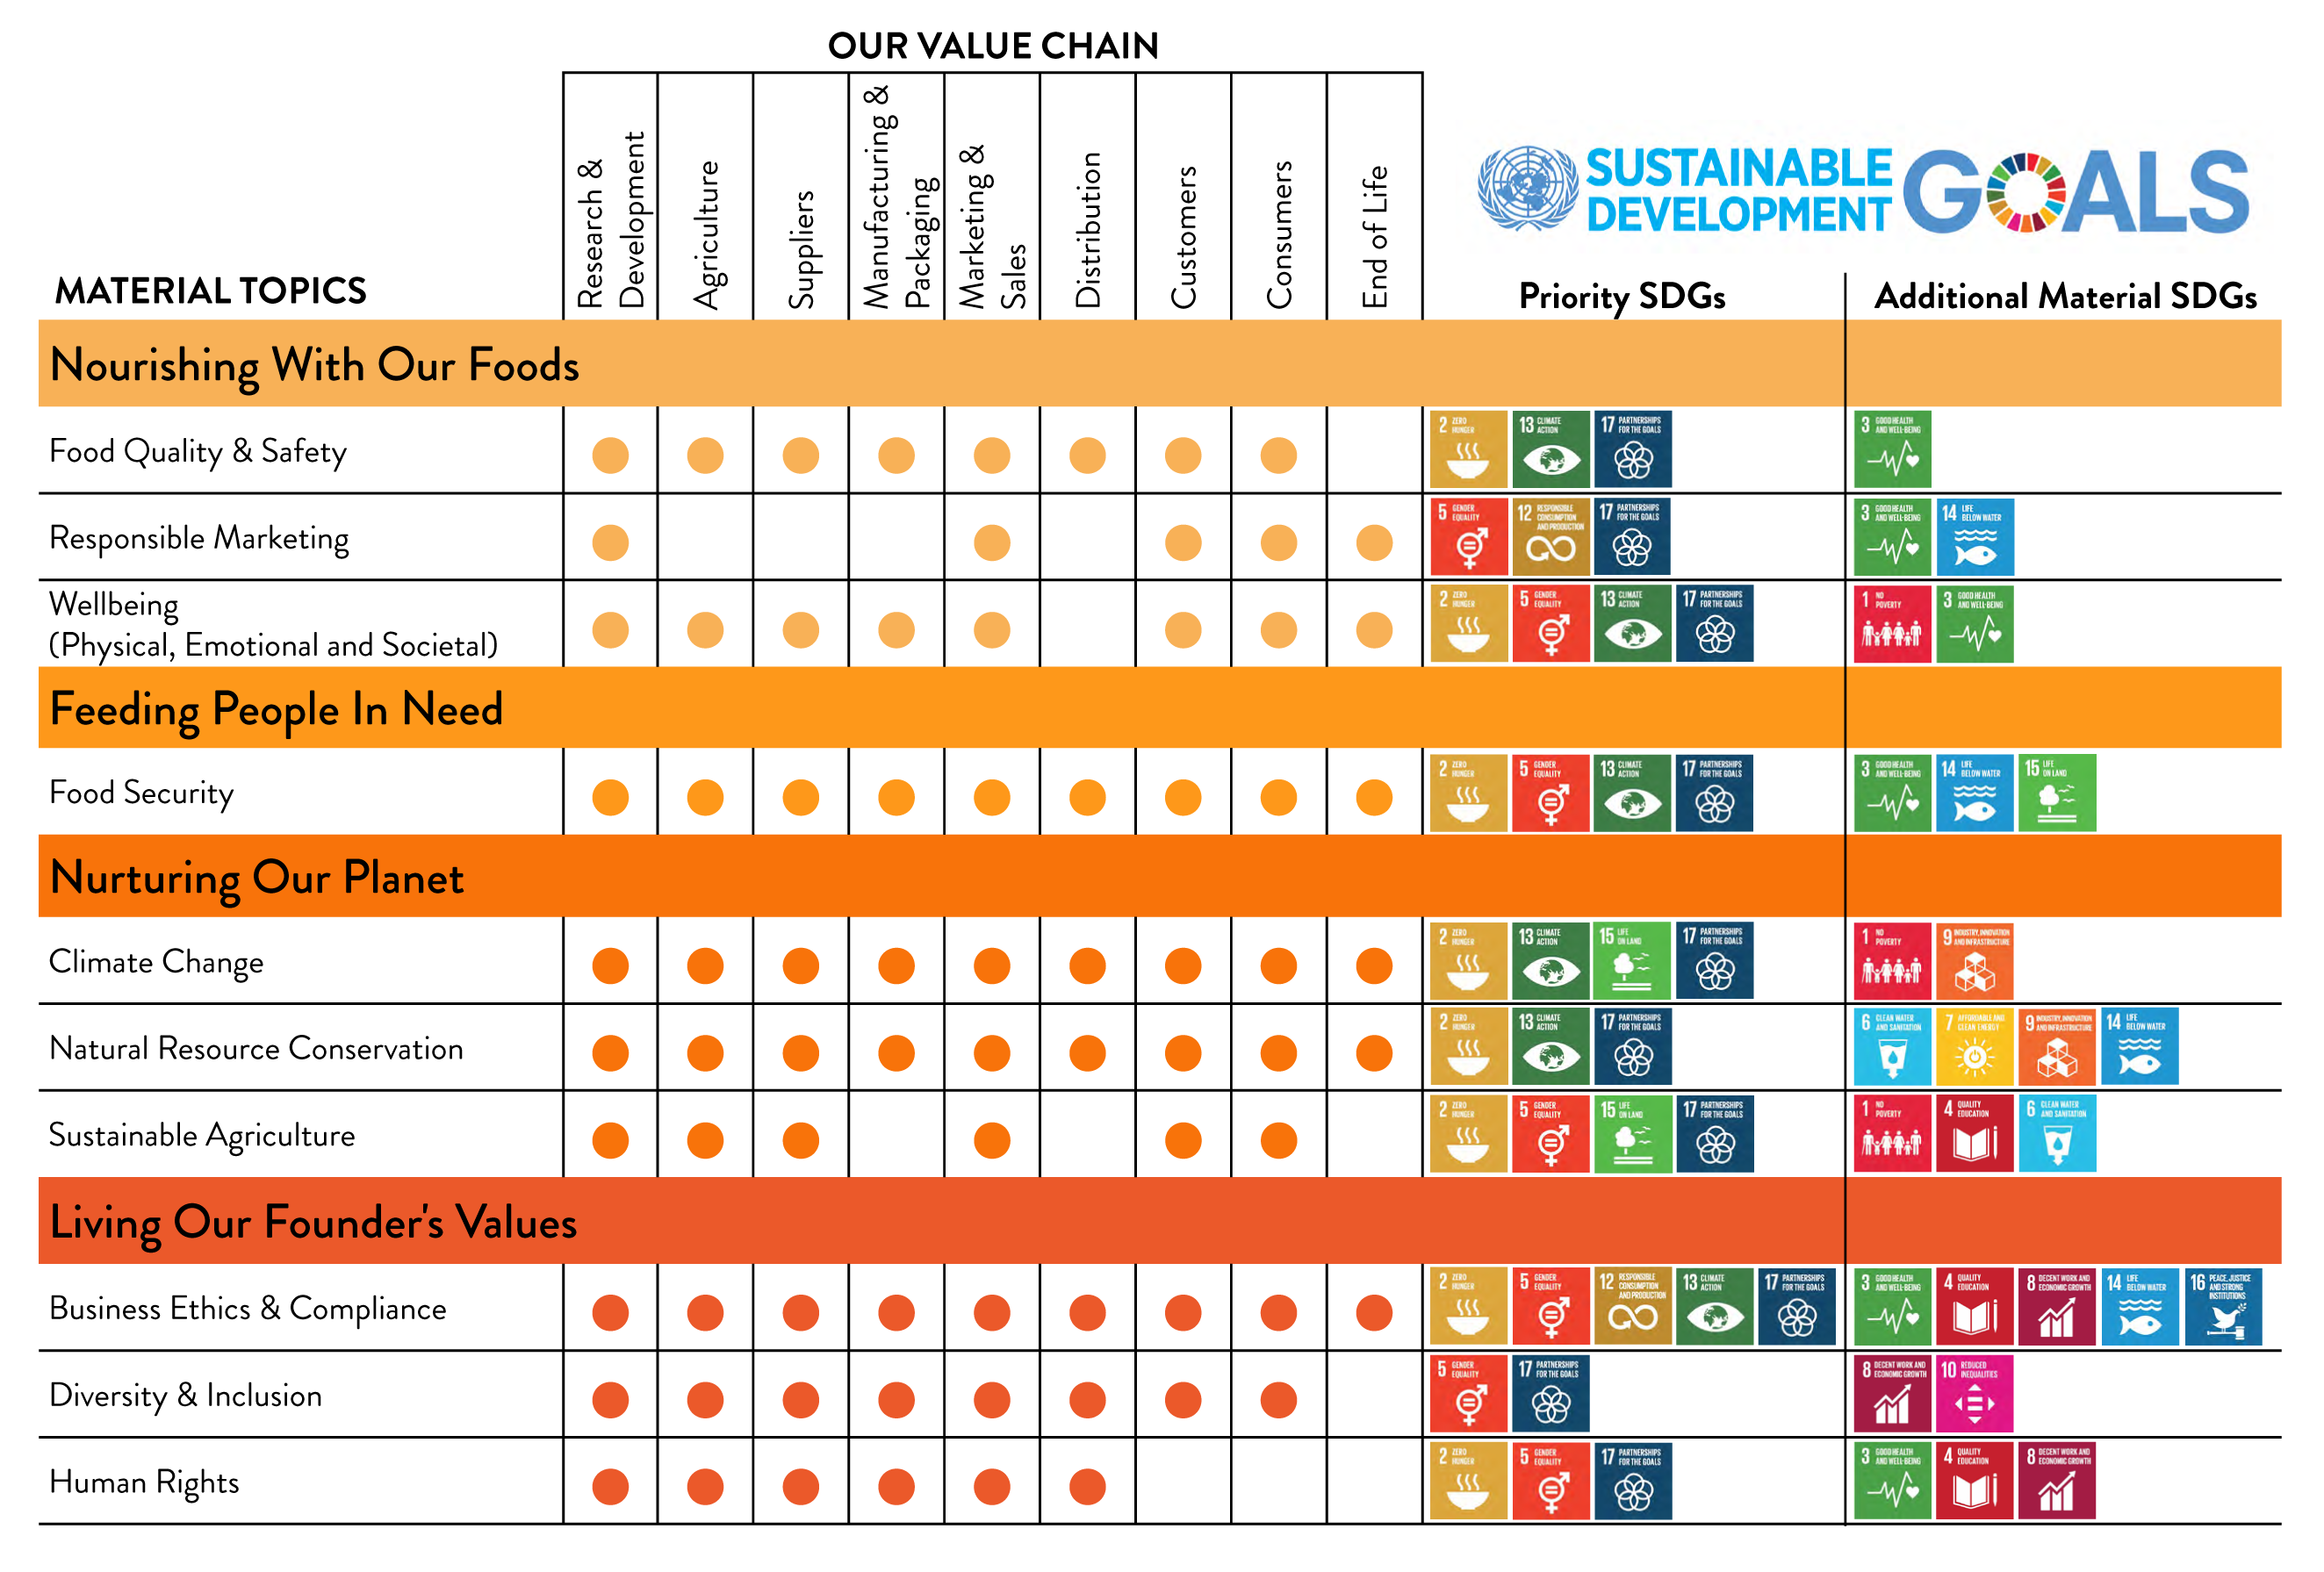 Kellogg Company material topics, evaluated against the United Nations Sustainable Development Goals